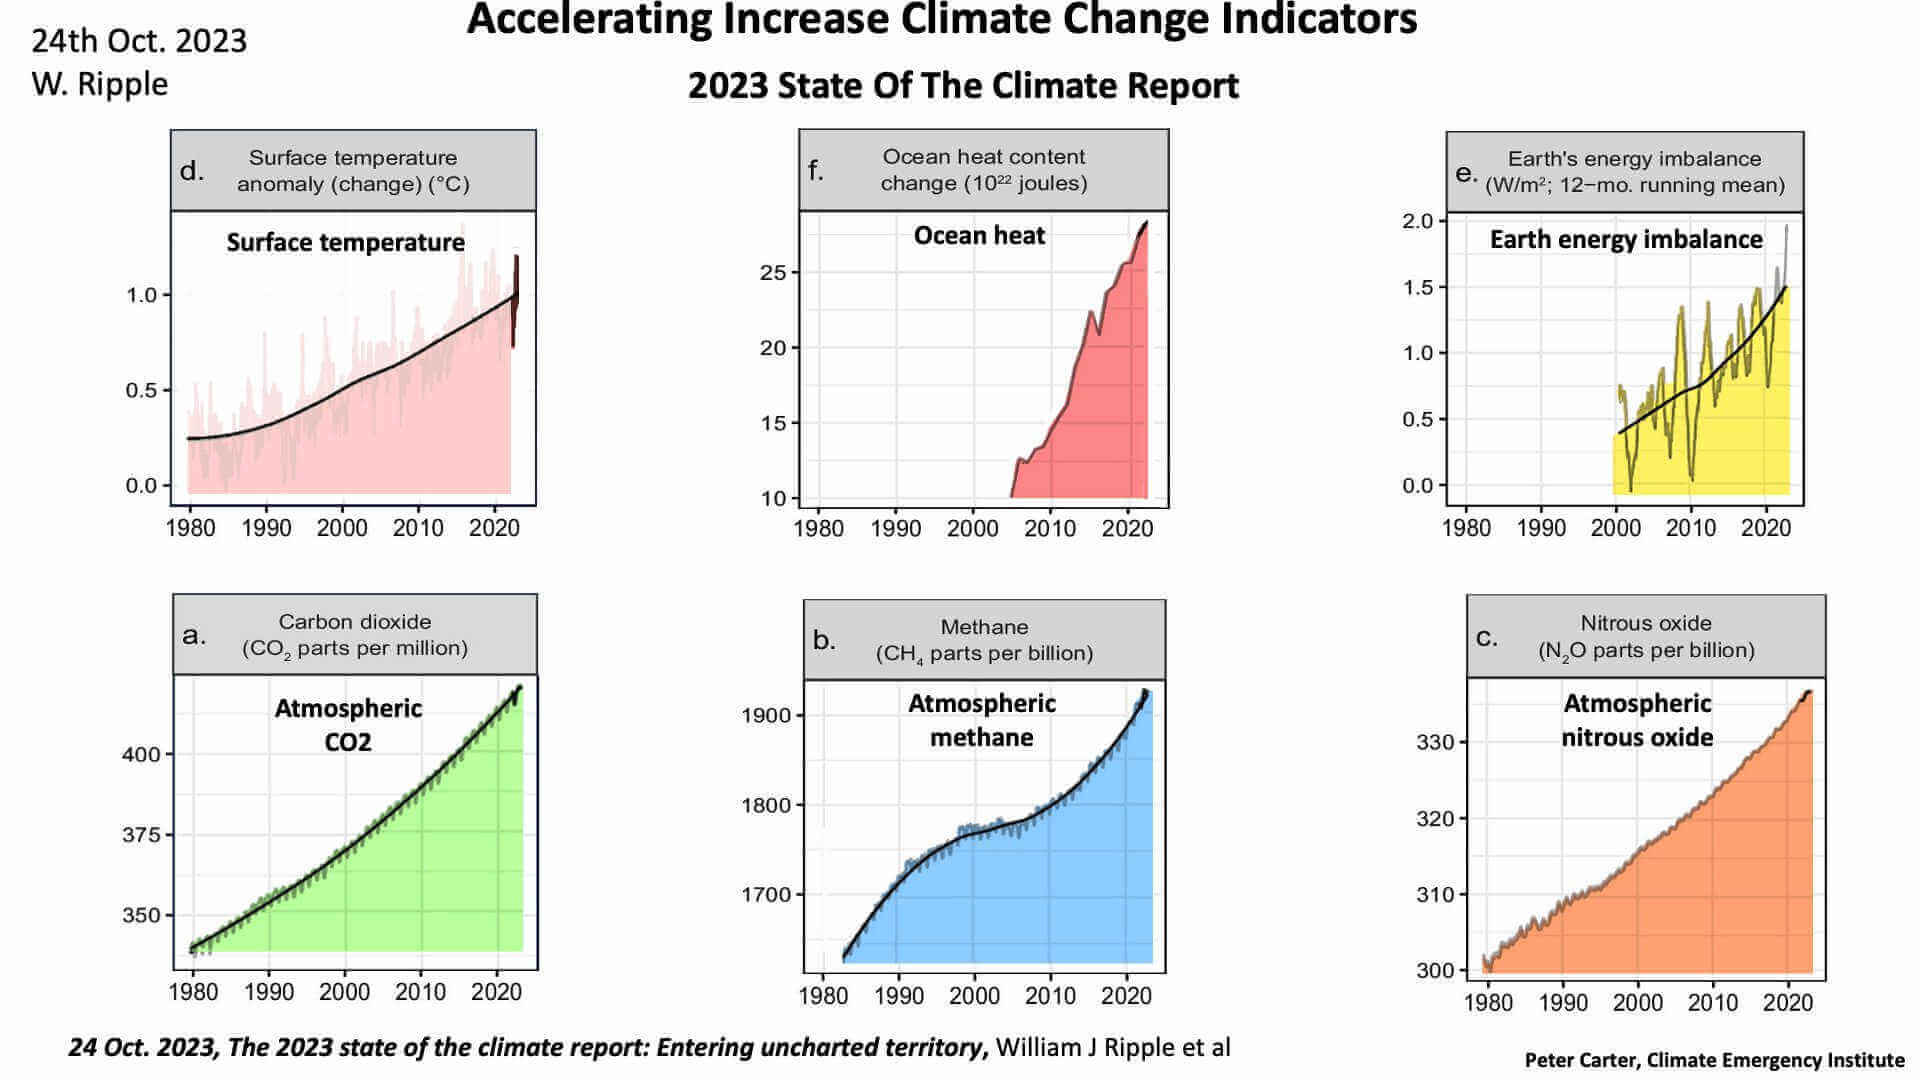 2023 state of the climate report